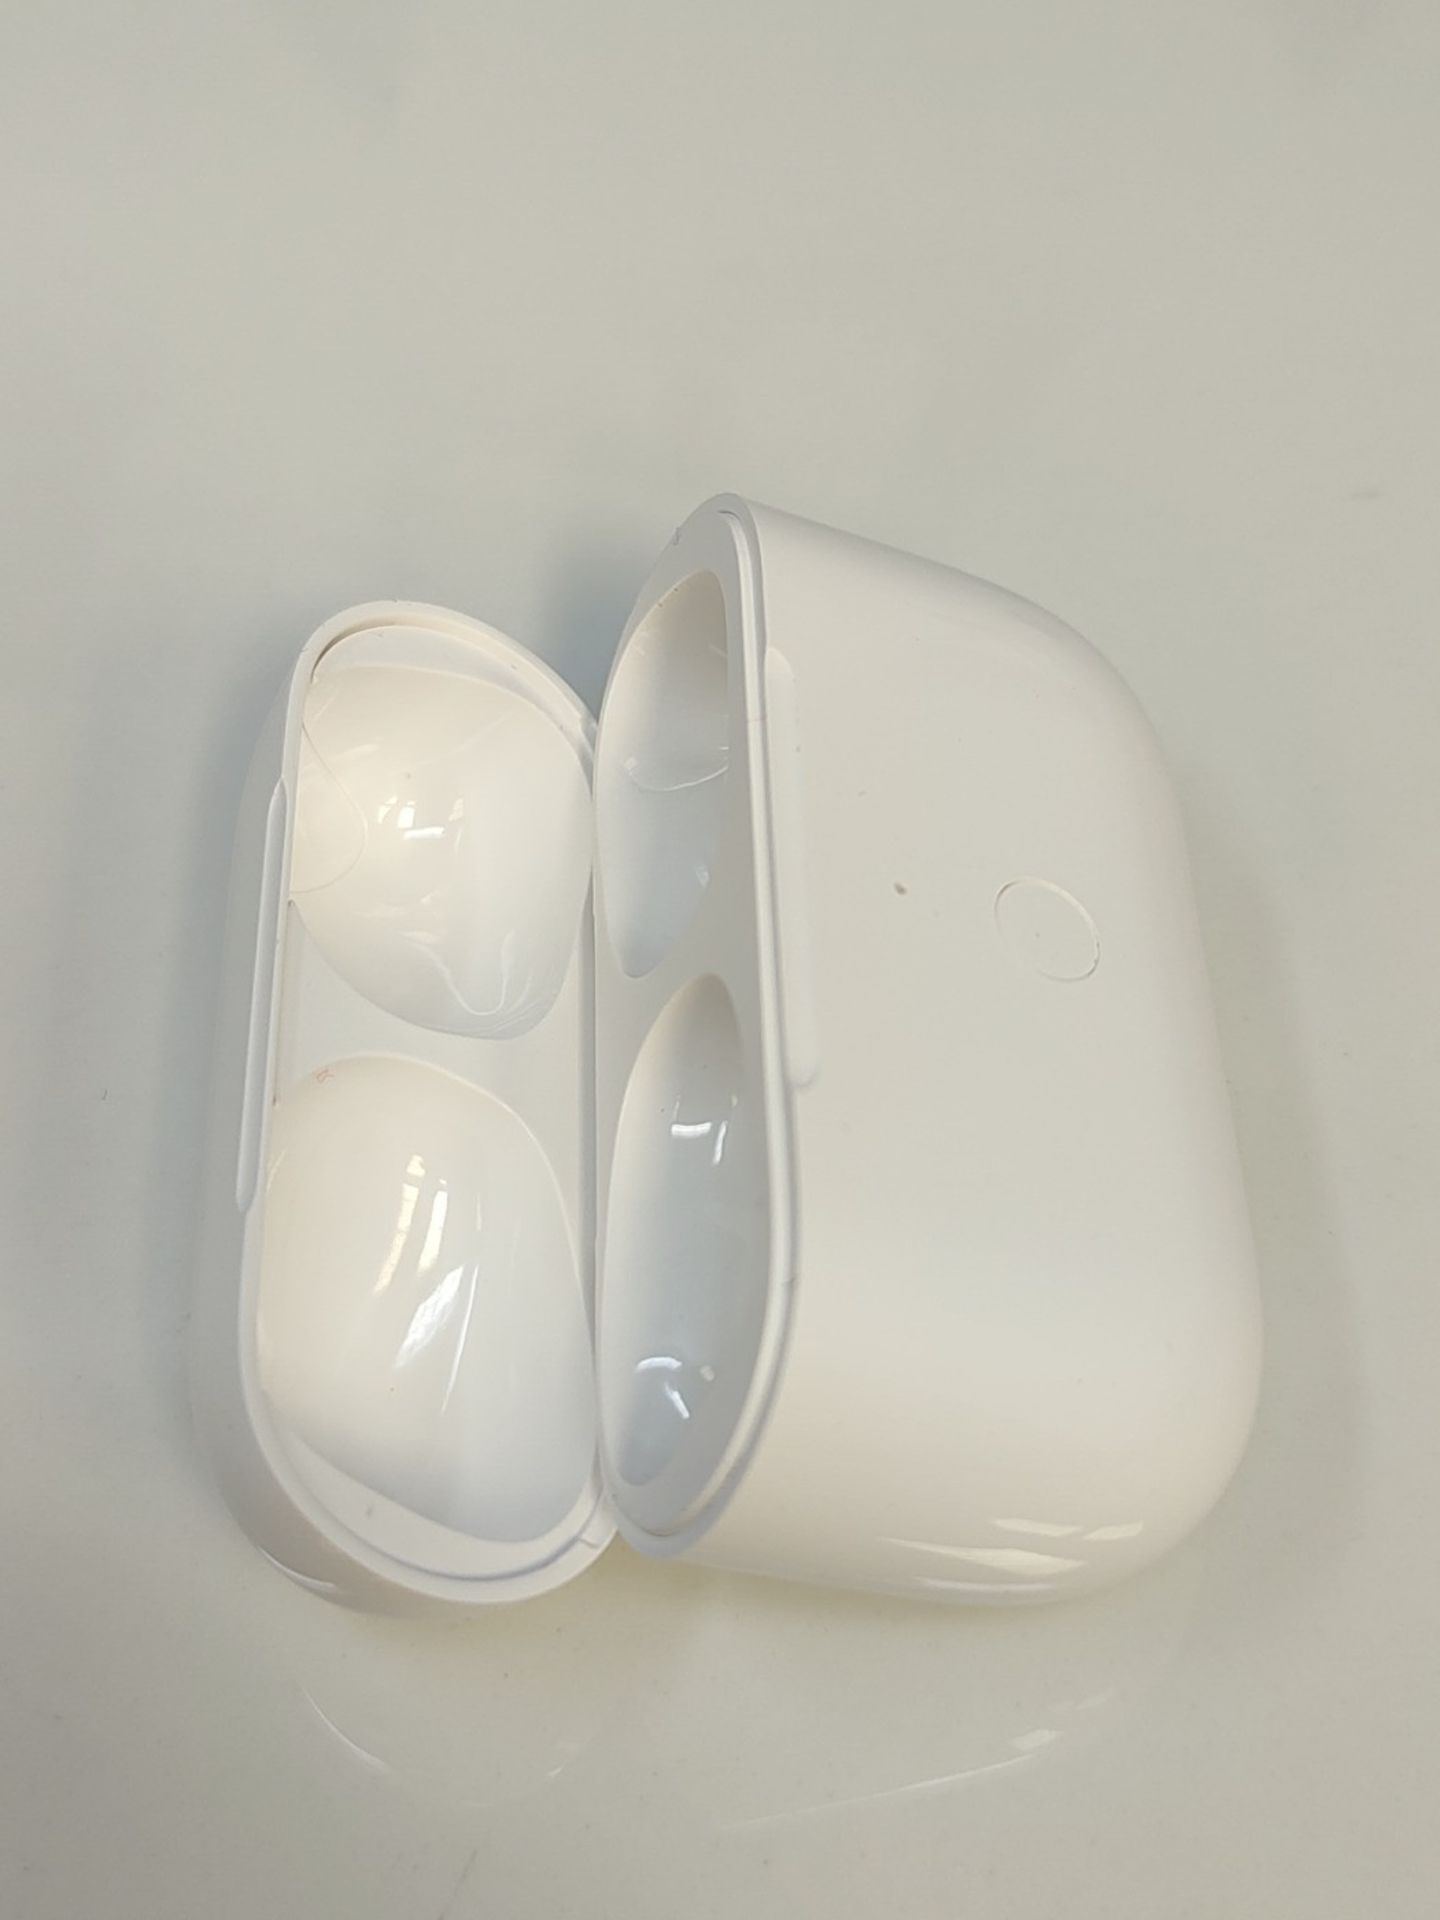 Wireless Charging Case for AirPods Pro 1 and AirPods Pro 2, Replacement Charging Case - Image 3 of 6